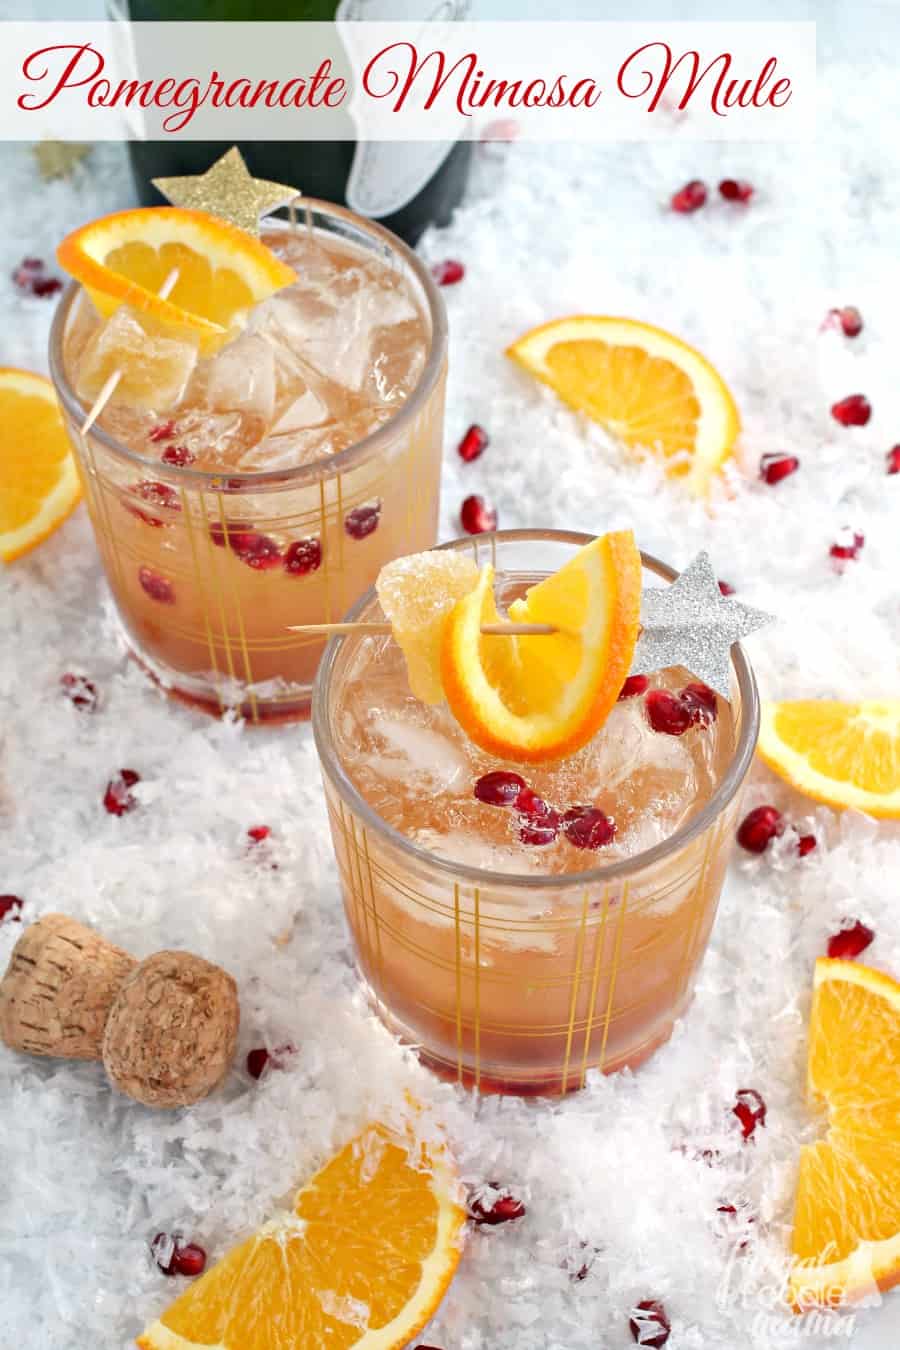 Two classic cocktails come together into one delicious & bubbly concoction in this Pomegranate Mimosa Mule. Perfect for a midnight toast or a weekend brunch!